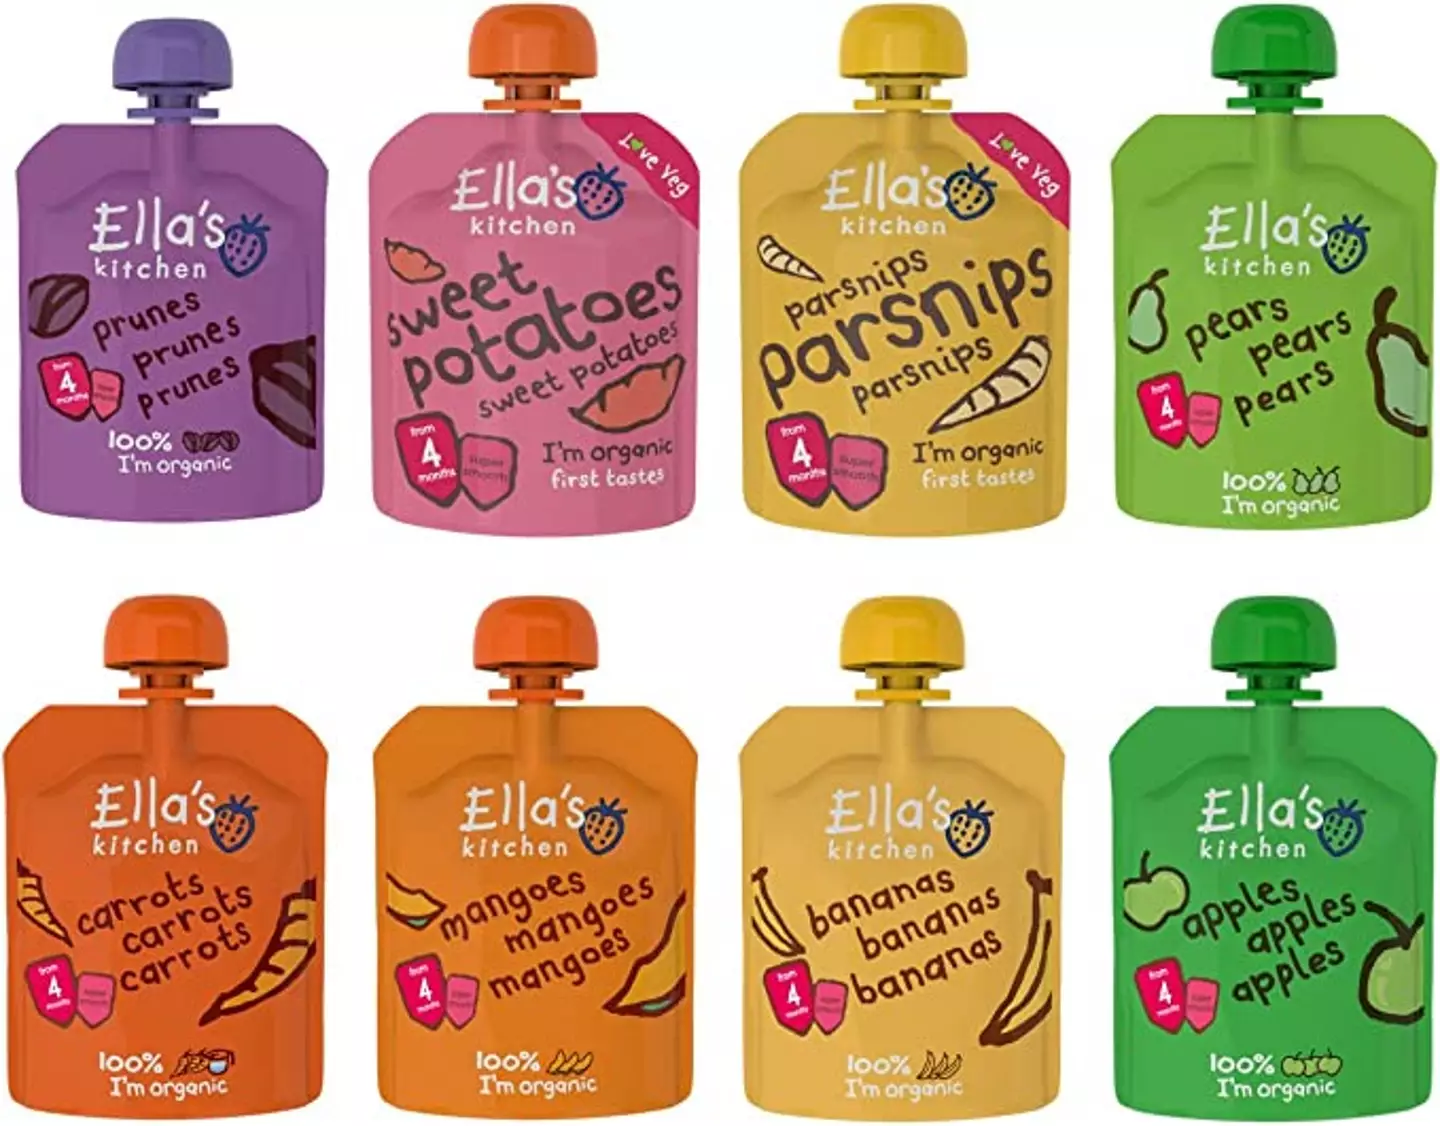 Ella's Kitchen was one of the brands called out by the survey.